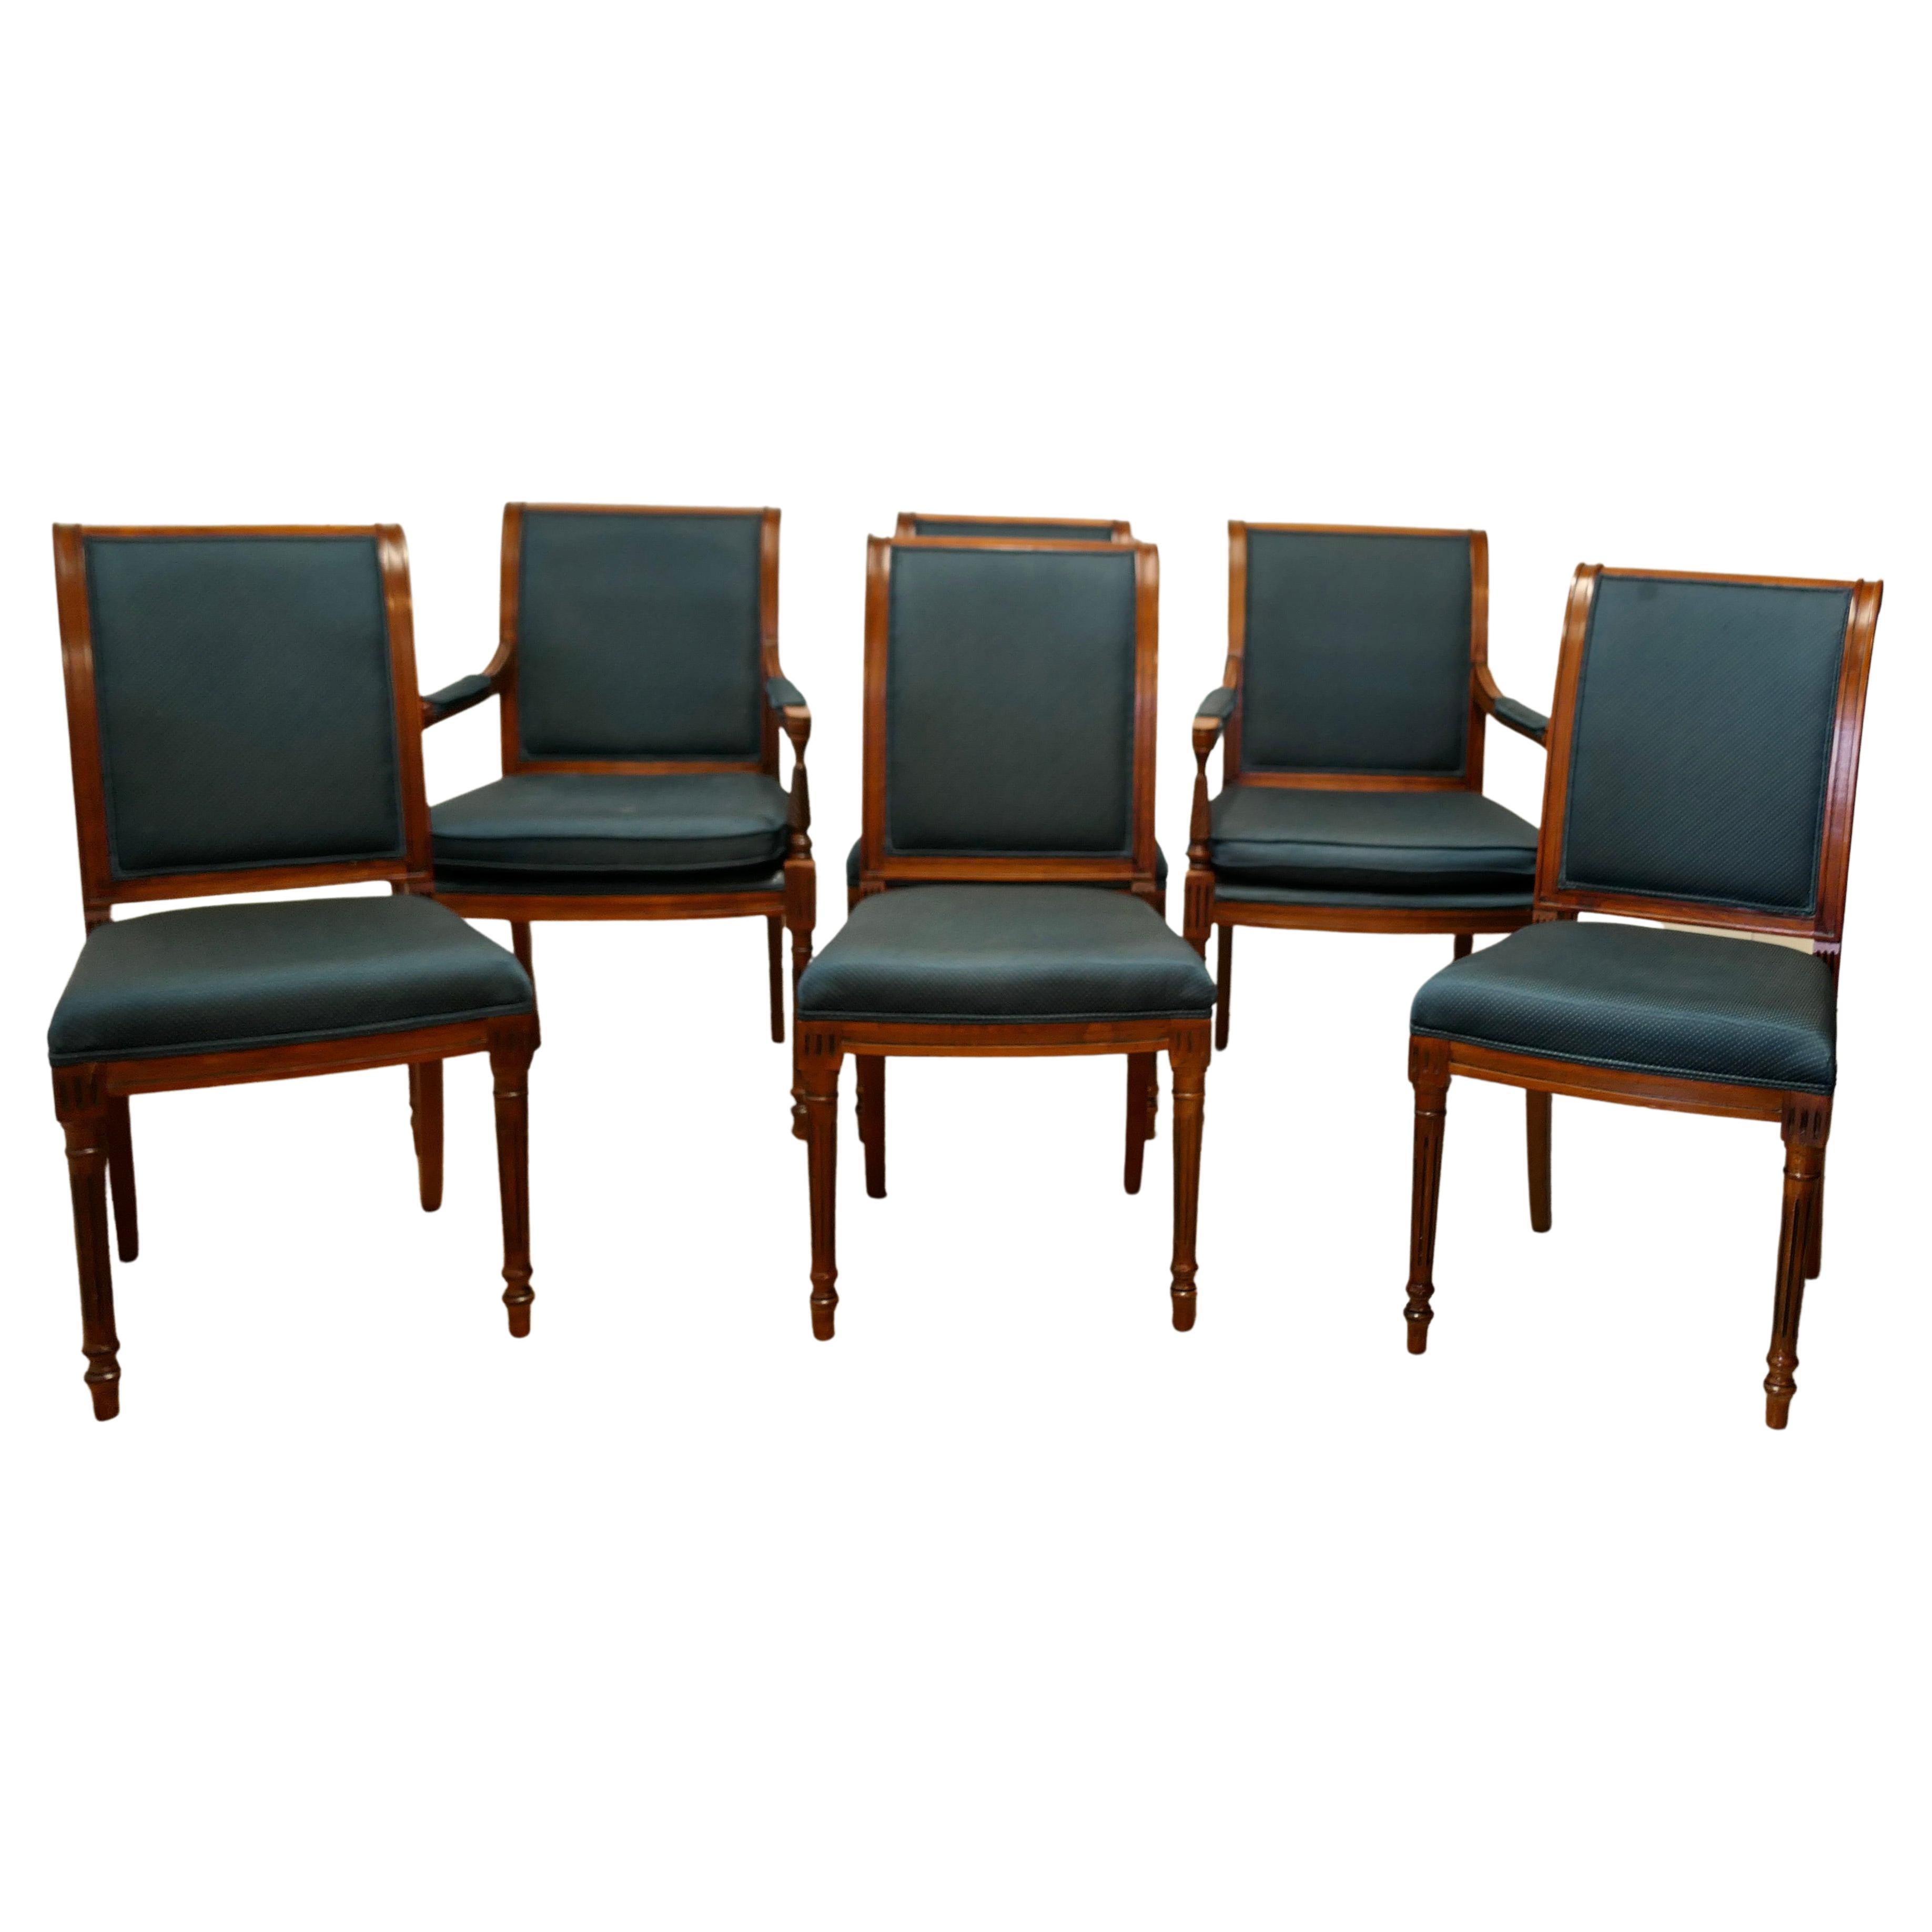 Set of 6 Midcentury Teak Dining Chairs in the Regency Style a Good Quality Set For Sale